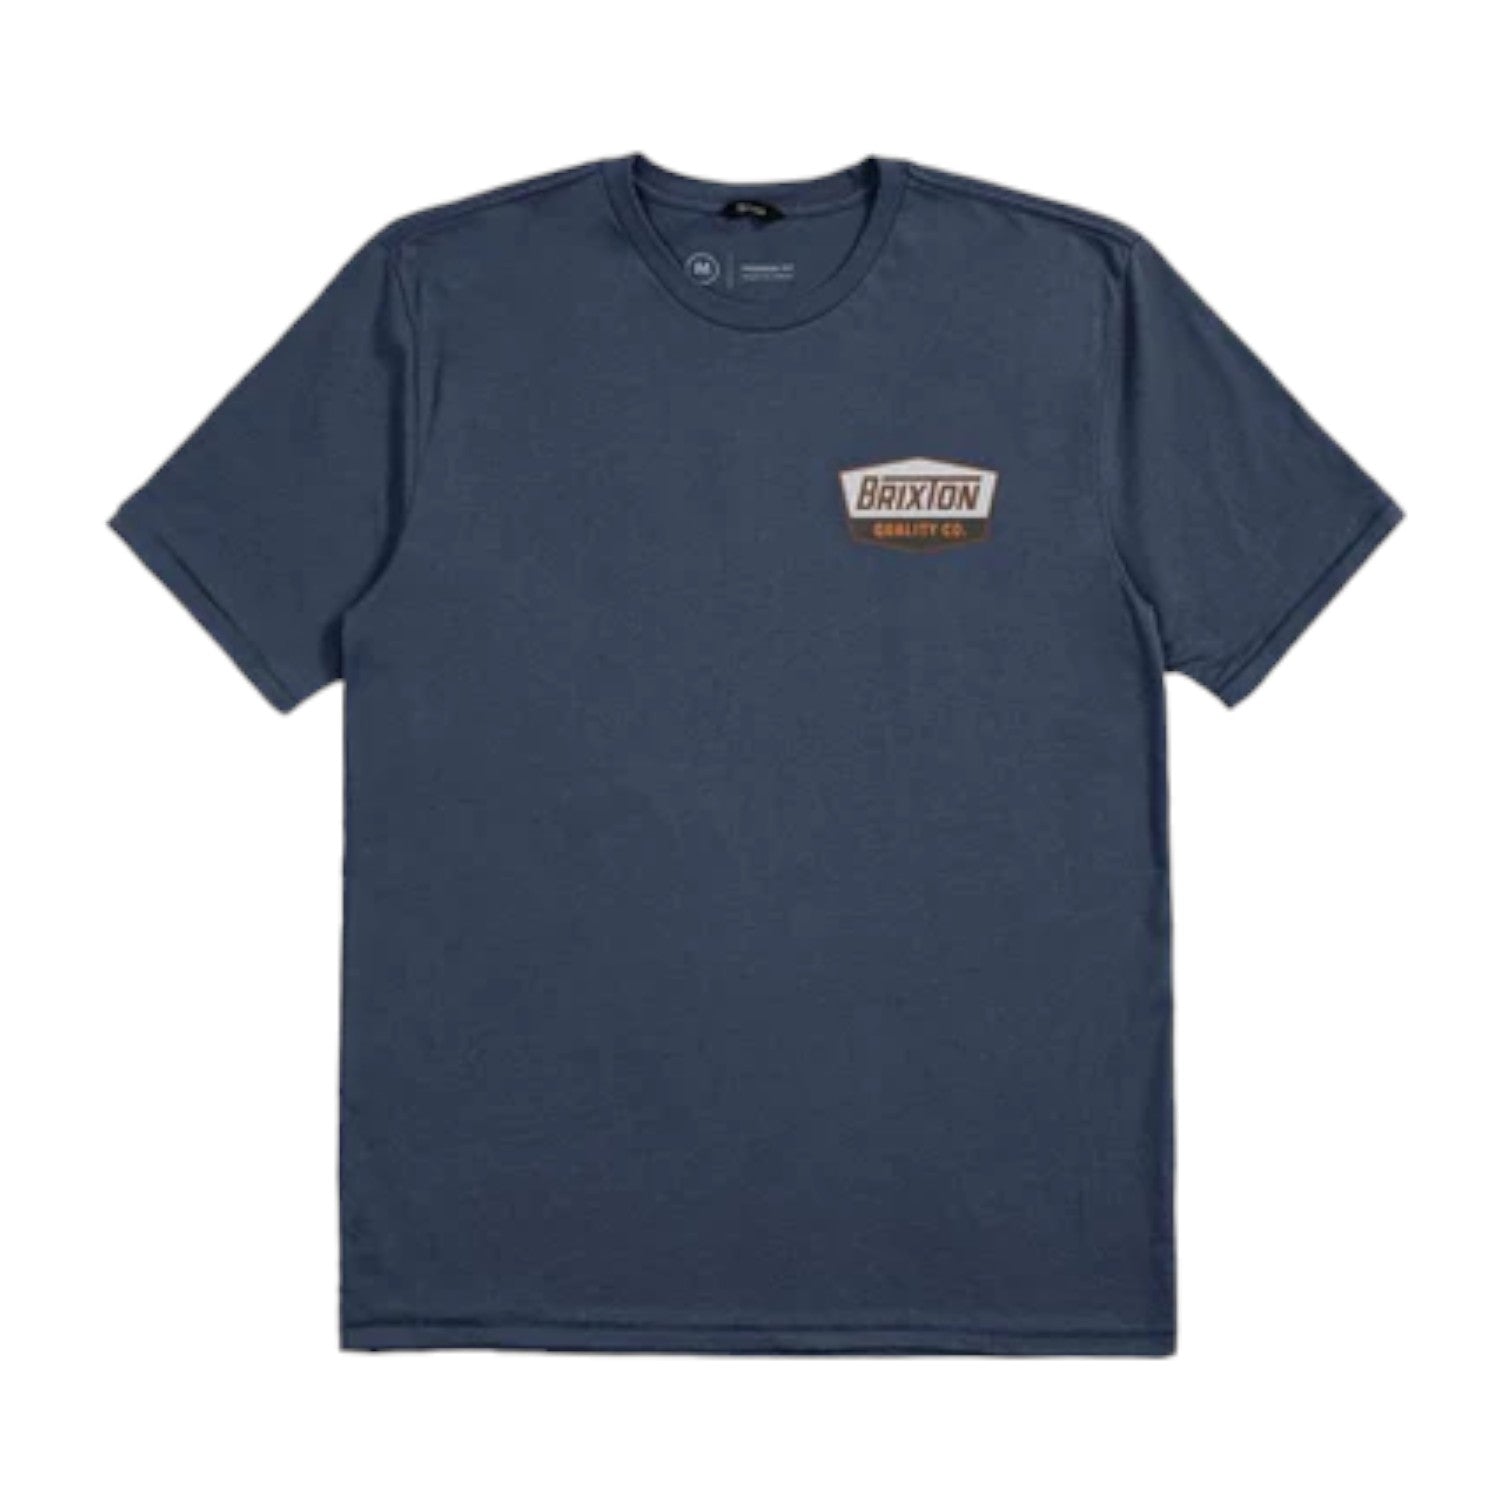 Brixton Regal S/S Standard Tee- Washed Navy/Sepia